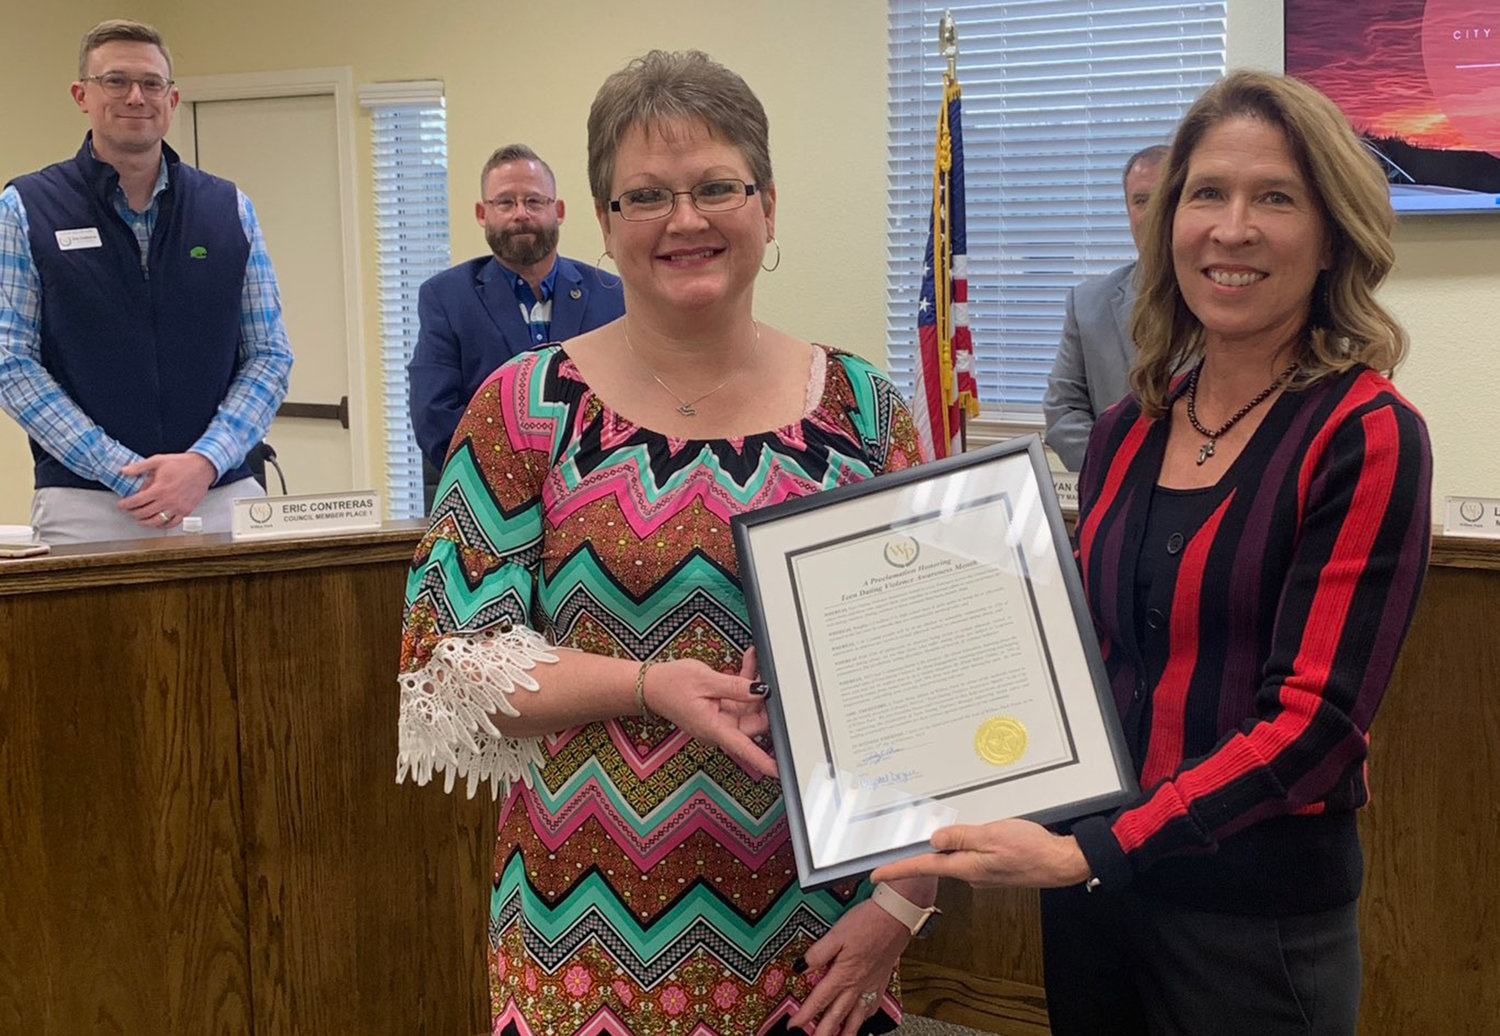 Carol Sutton of Freedom House (left) was presented with a proclamation by Willow Park Mayor Pro Tem Lea Young.